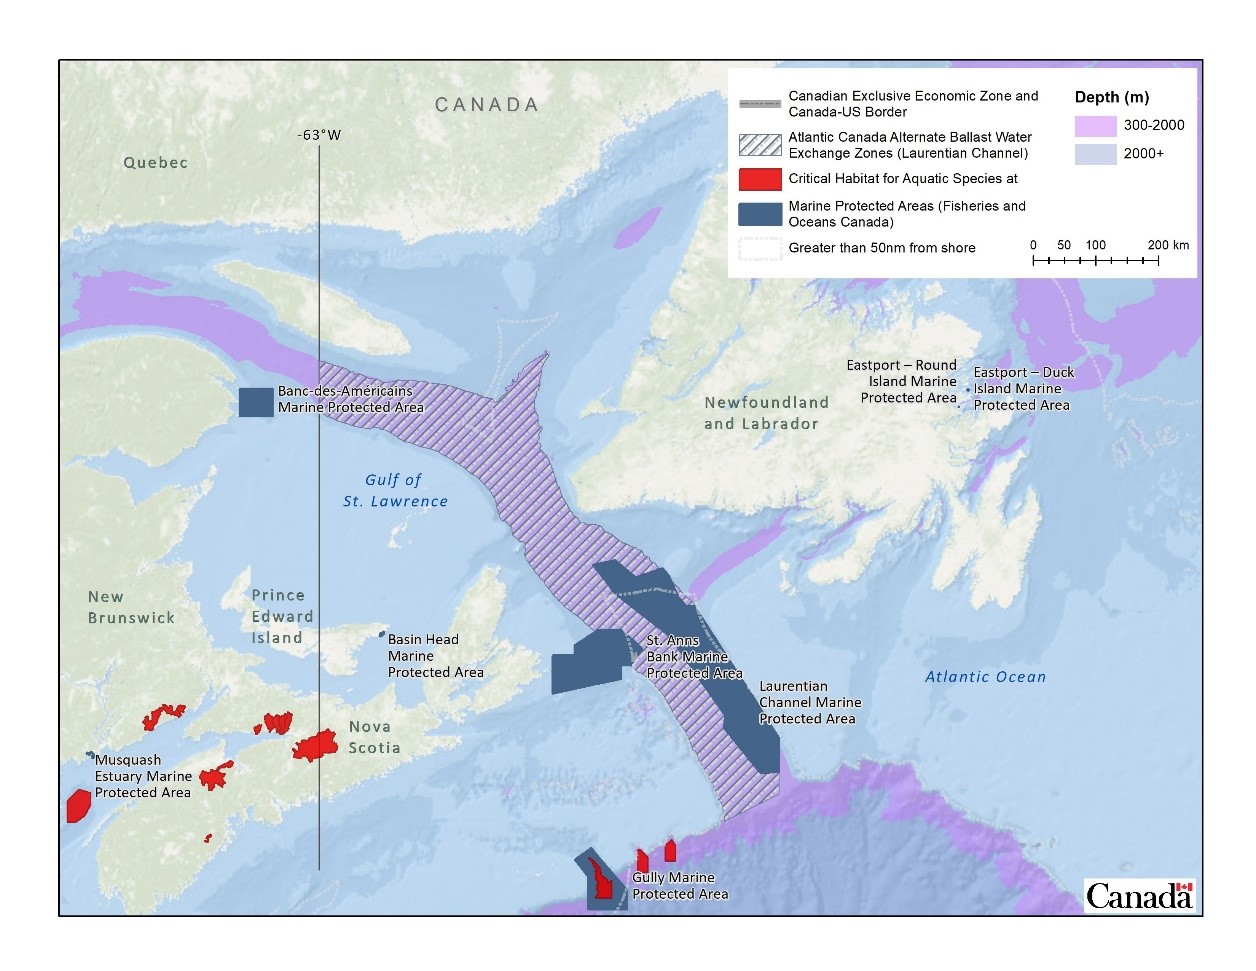 Figure 1. Designated Alternate Ballast Water Exchange Area in the Gulf of St. Lawrence.